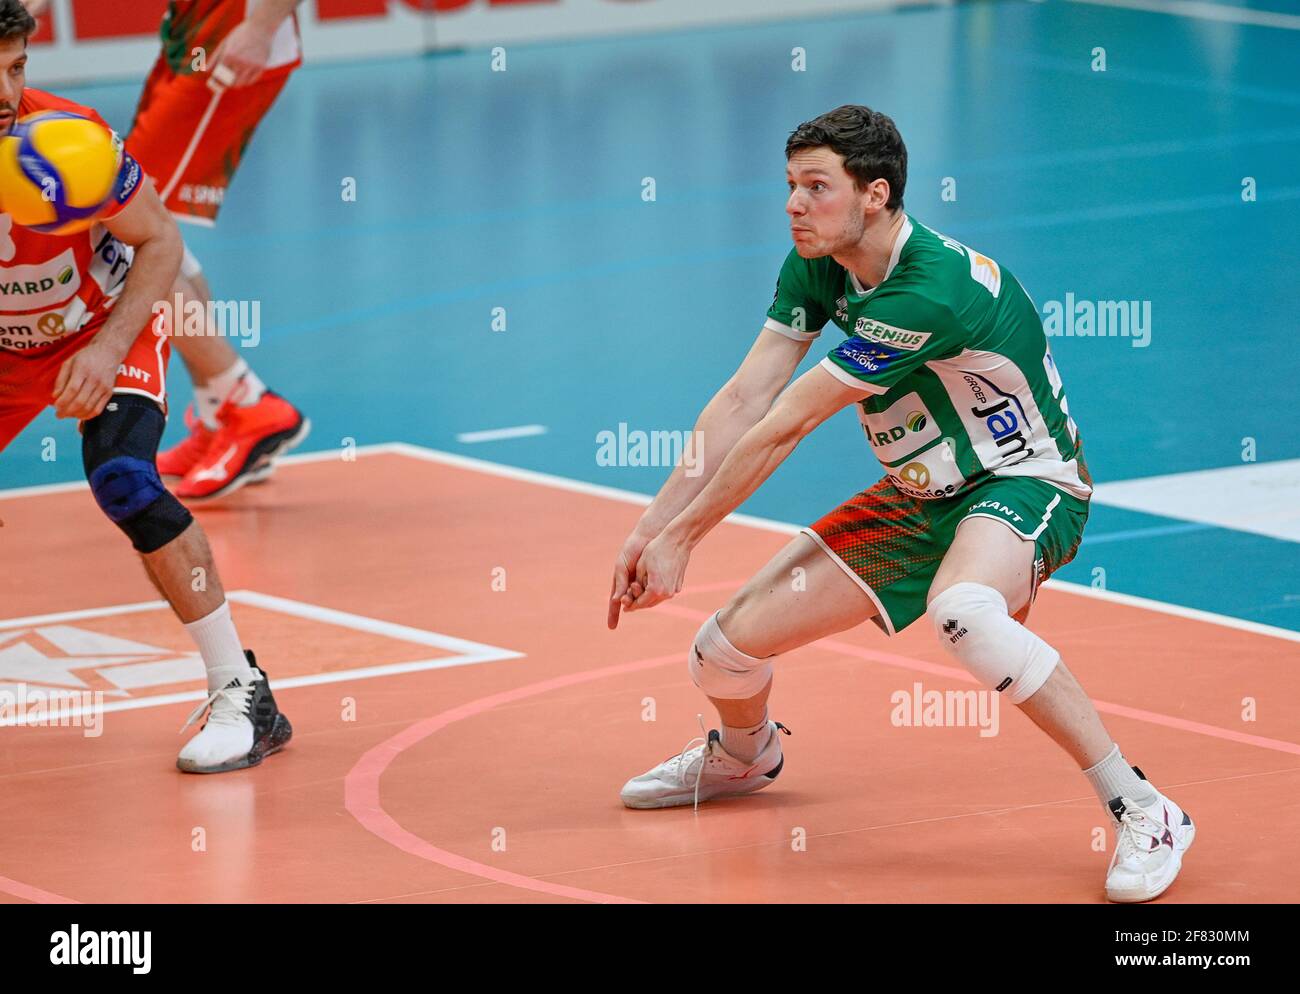 Roeselare, Belgium. 10th Apr, 2021. Dutch libero Just Dronkers of Maaseik  pictured during a Volleyball game between Knack Volley Roeselare and  Greenyard Maaseik, the third game in a best of five in